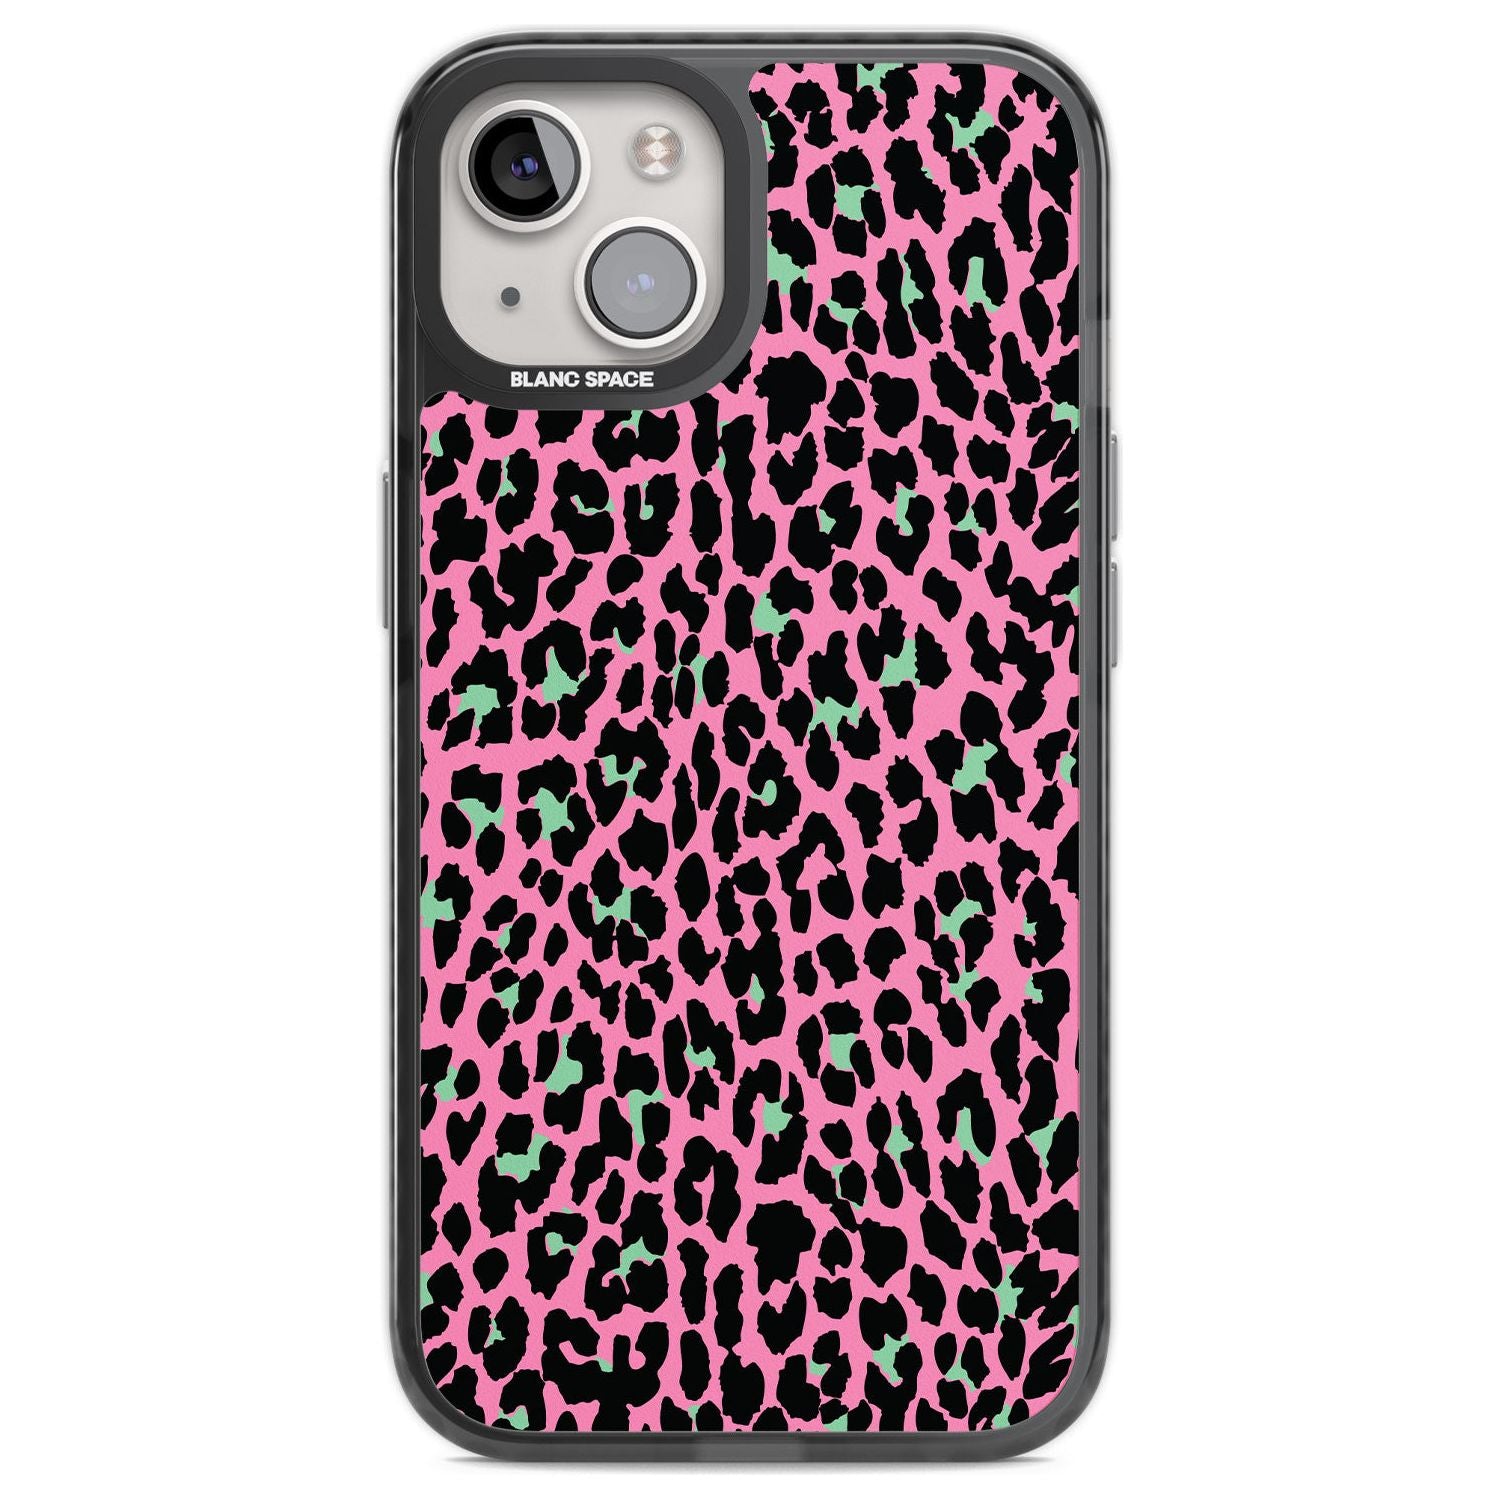 Green on Pink Leopard Print Pattern Phone Case iPhone 12 / Black Impact Case,iPhone 13 / Black Impact Case,iPhone 12 Pro / Black Impact Case,iPhone 14 / Black Impact Case,iPhone 15 Plus / Black Impact Case,iPhone 15 / Black Impact Case Blanc Space